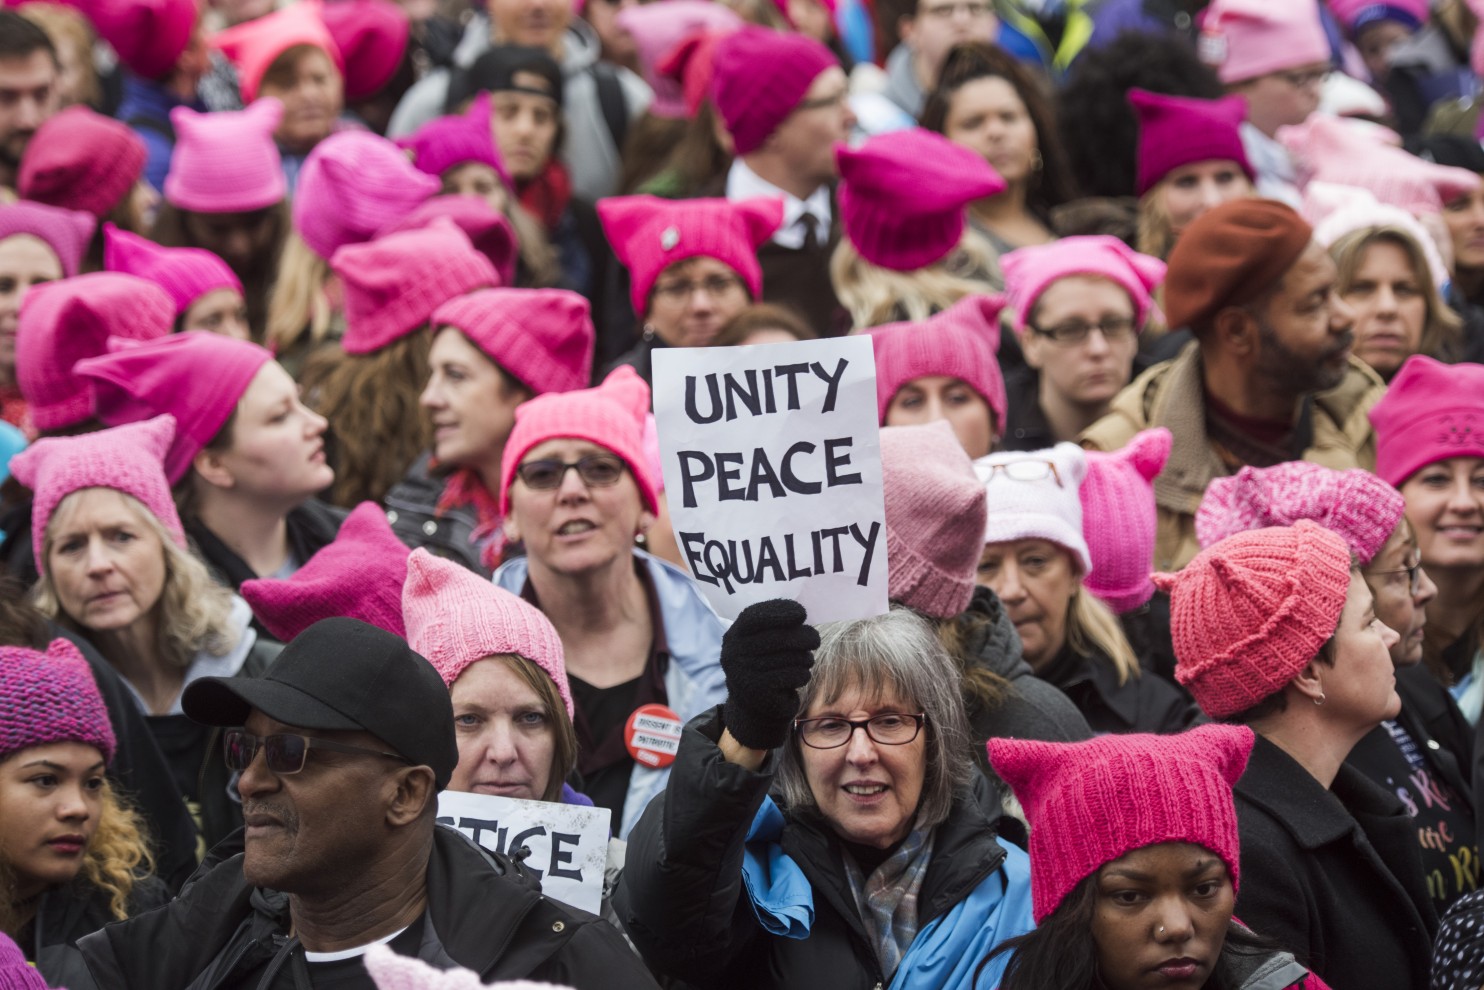 Was the Women’s March just another display of white privilege? Some think so.